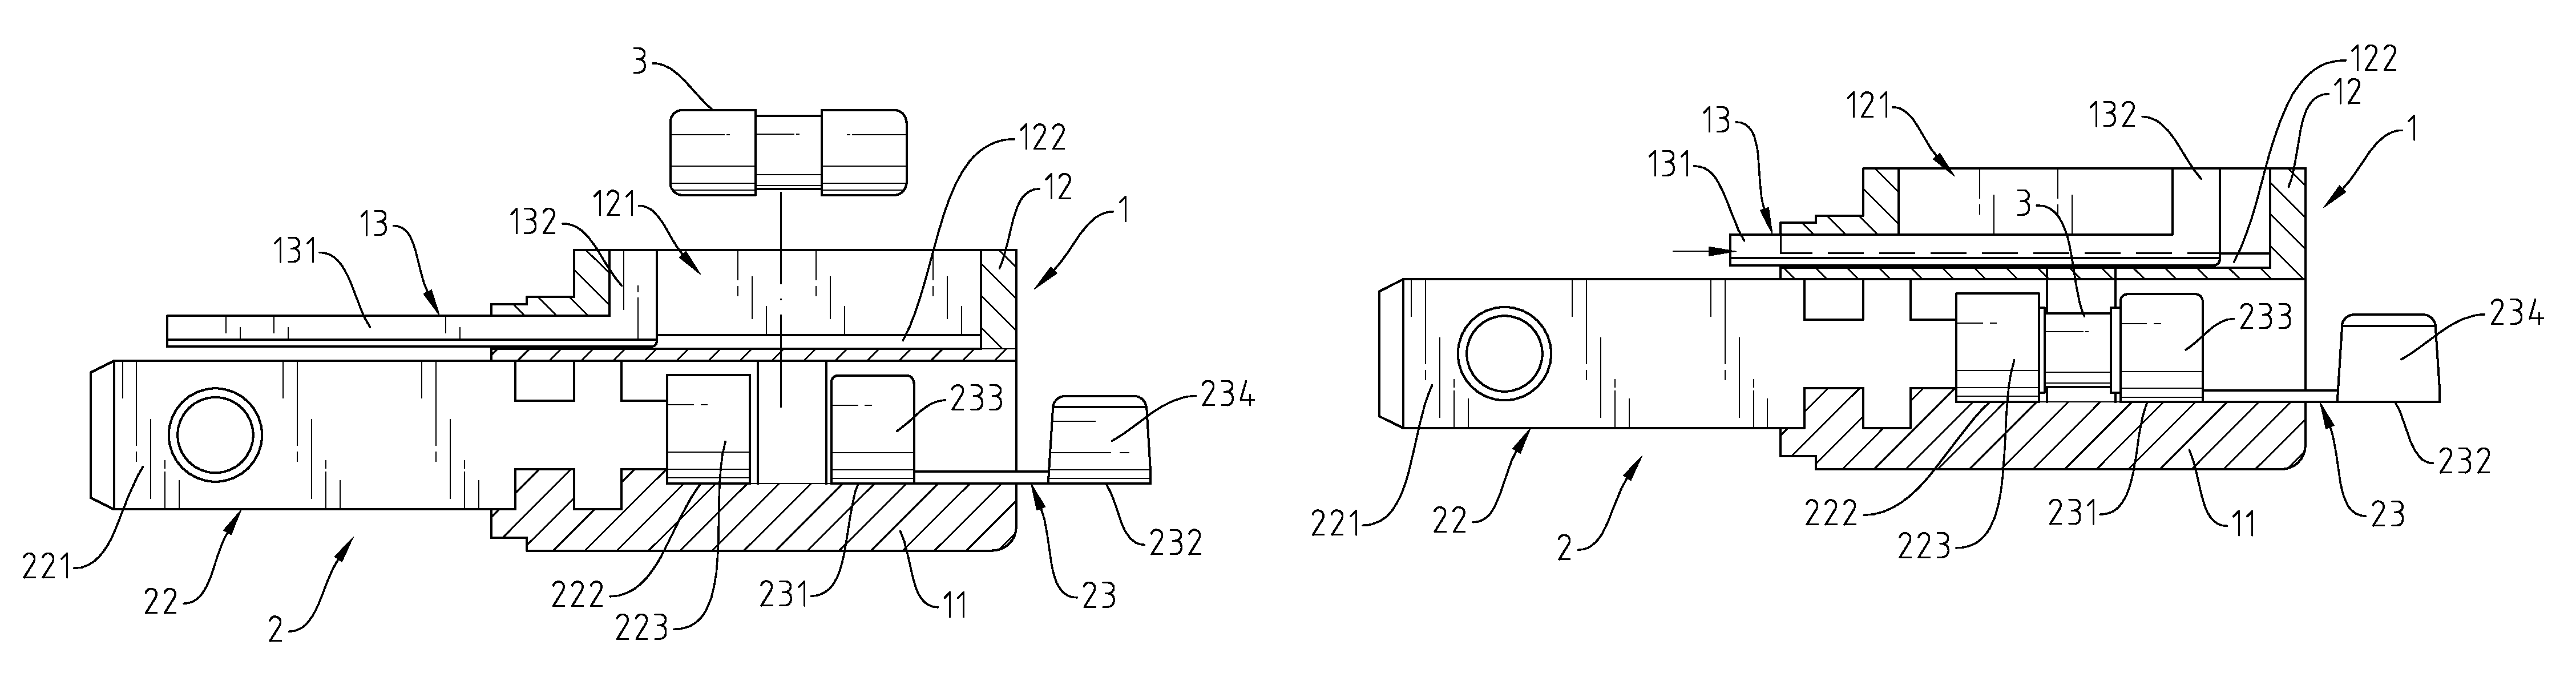 Electrical plug with a sliding cover extending from a front of an internal contact holder